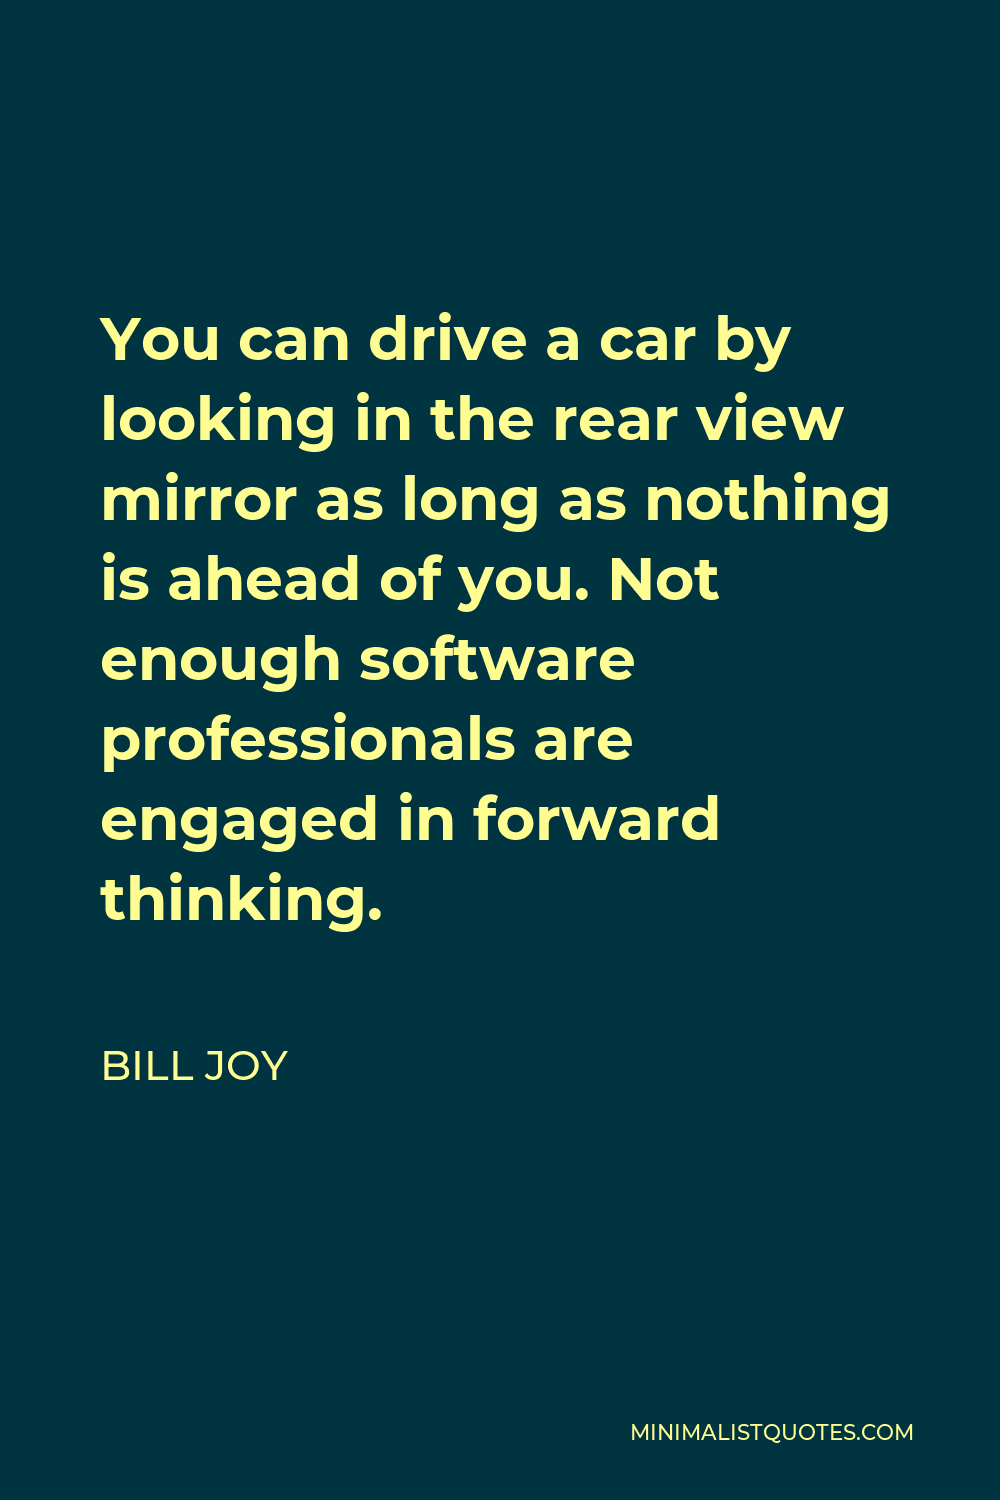 Bill Joy Quote - You can drive a car by looking in the rear view mirror as long as nothing is ahead of you. Not enough software professionals are engaged in forward thinking.